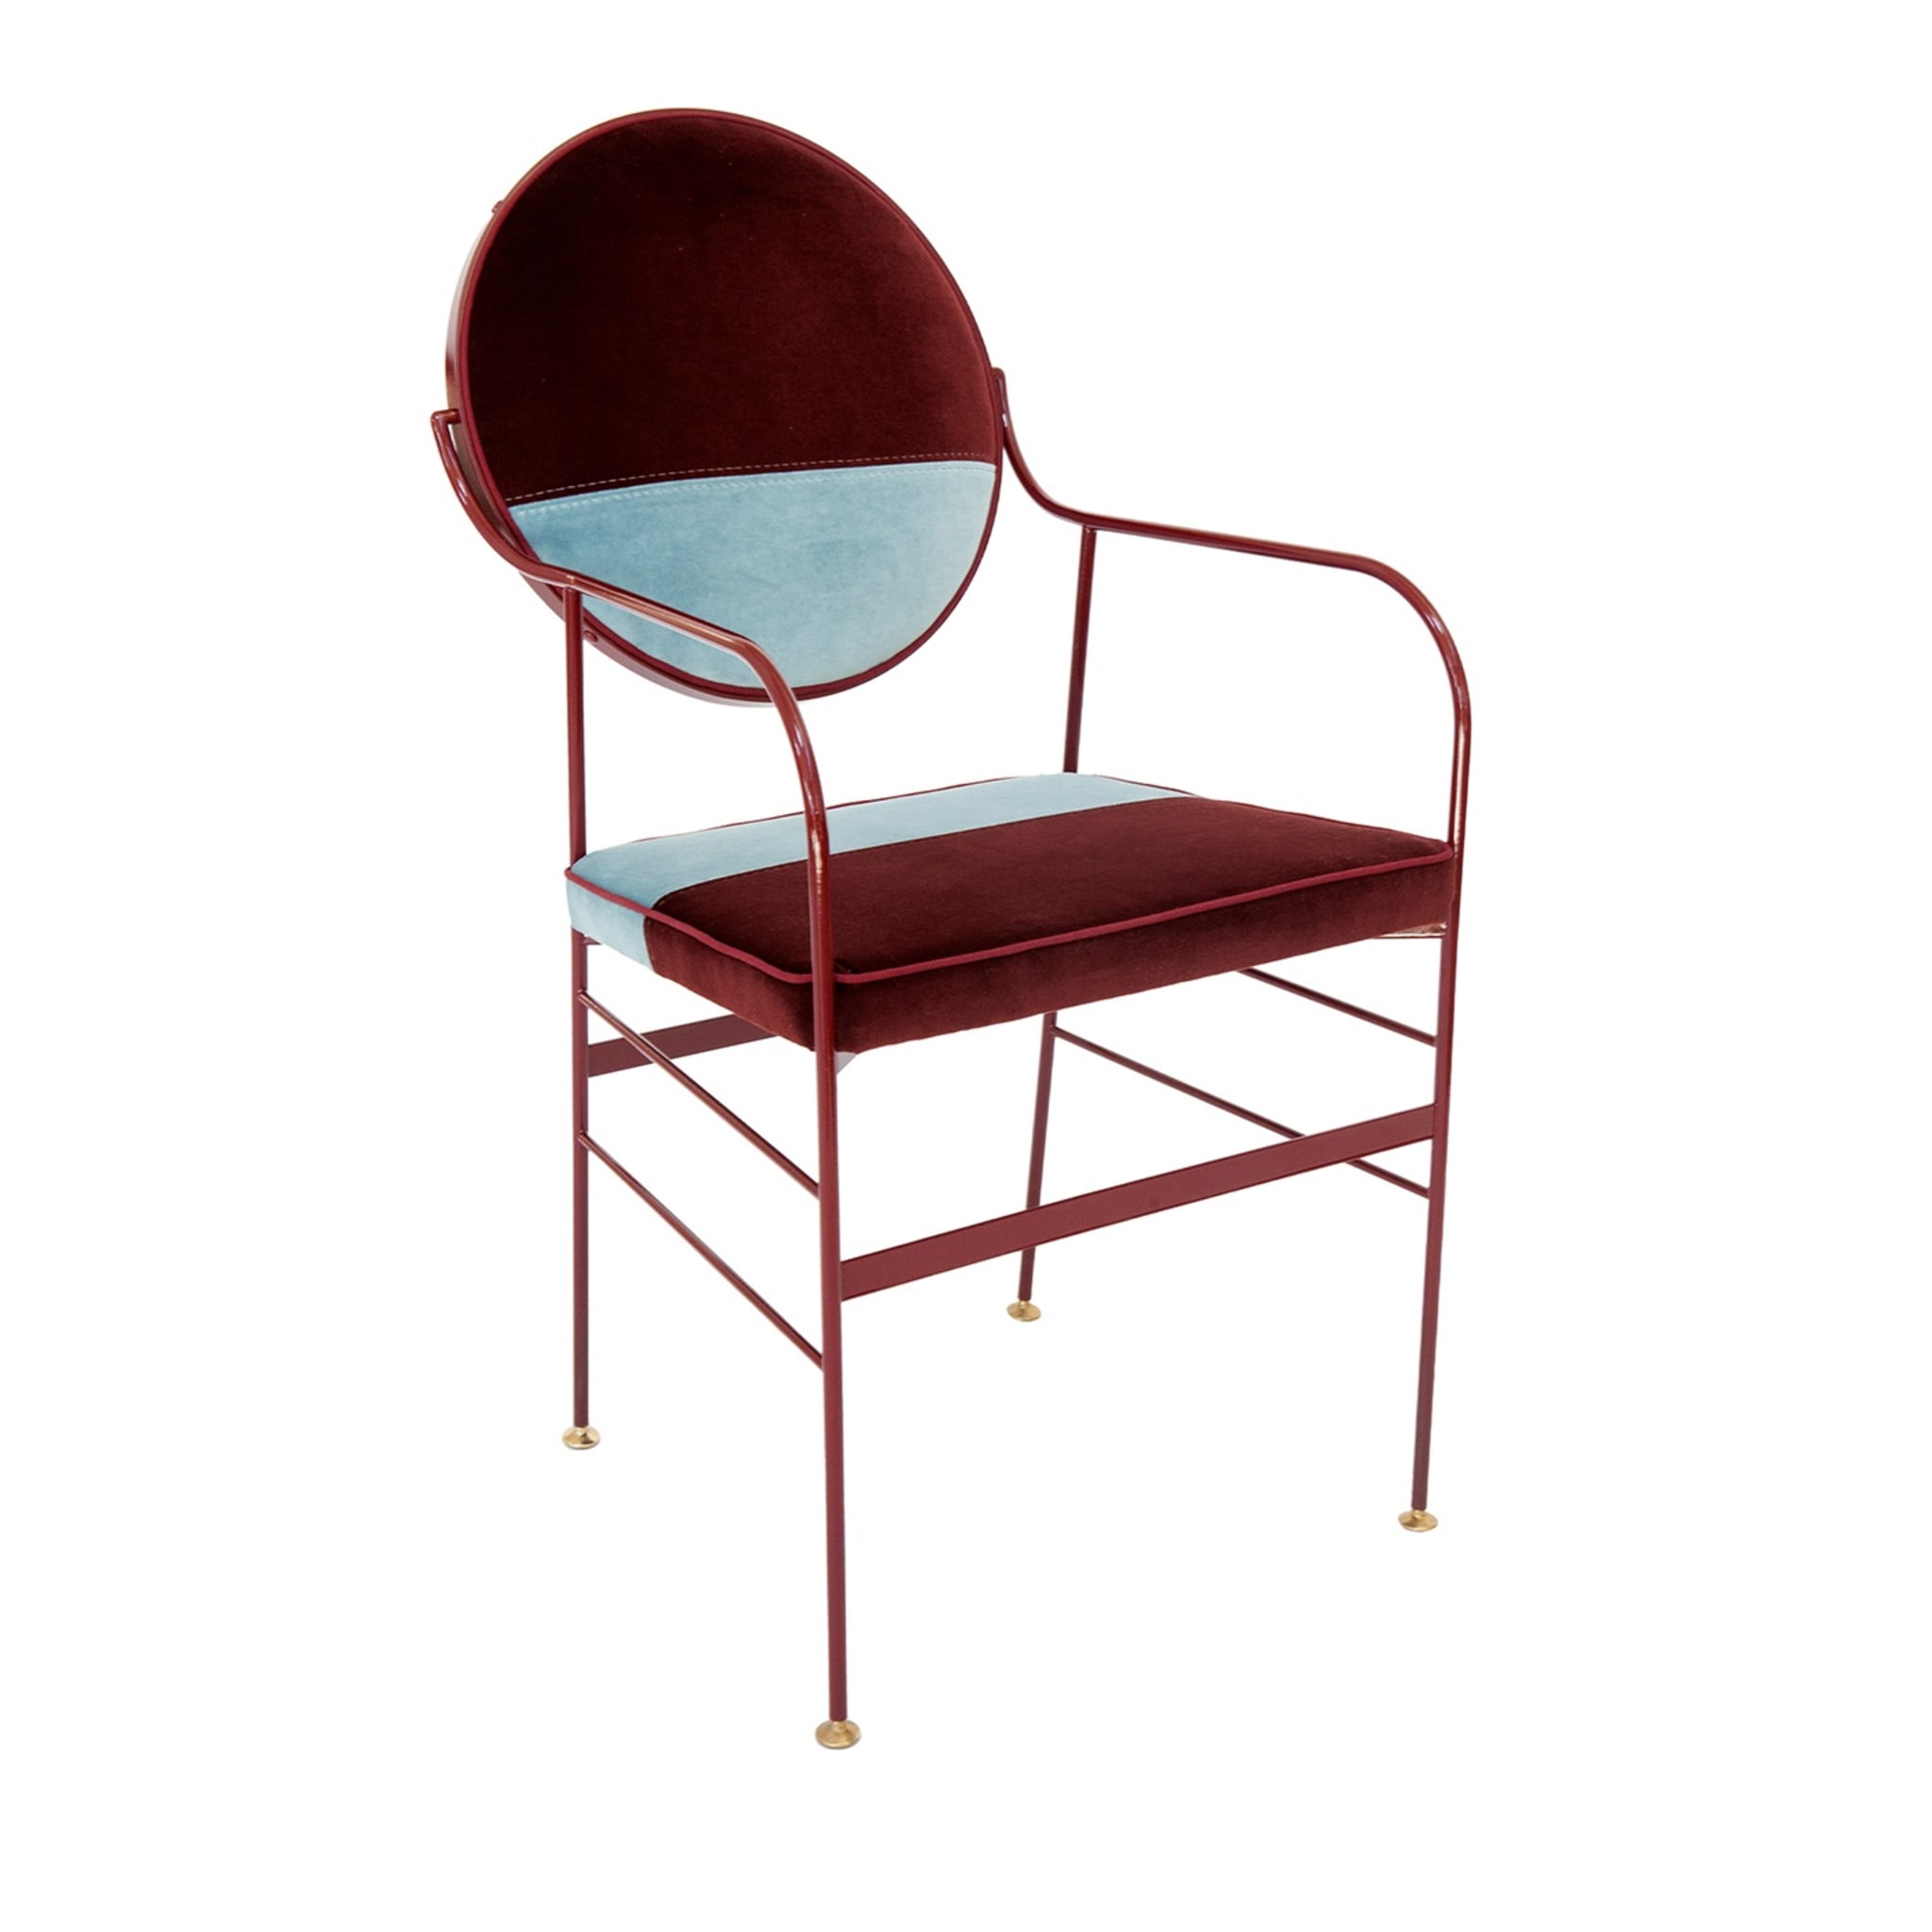 Set of 2 Luigina Burgundy and Light Blue Chair - Main view